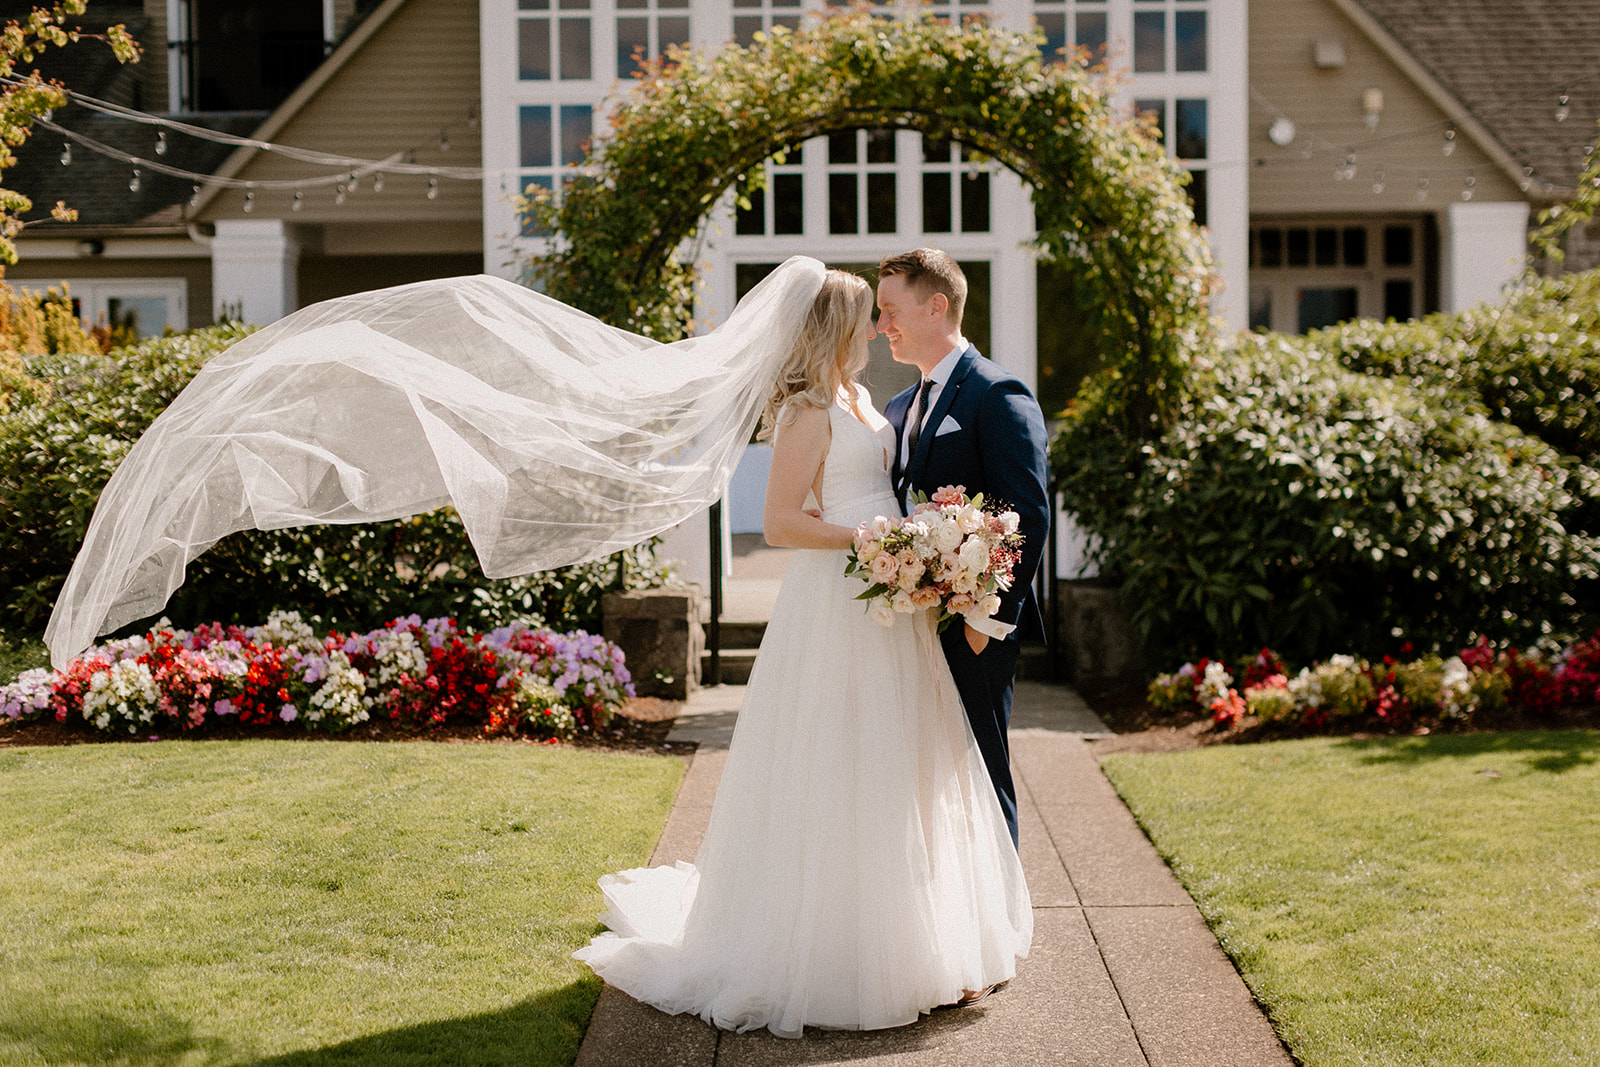 A bride and groom share a sweet moment outside at The Oregon Golf Club.